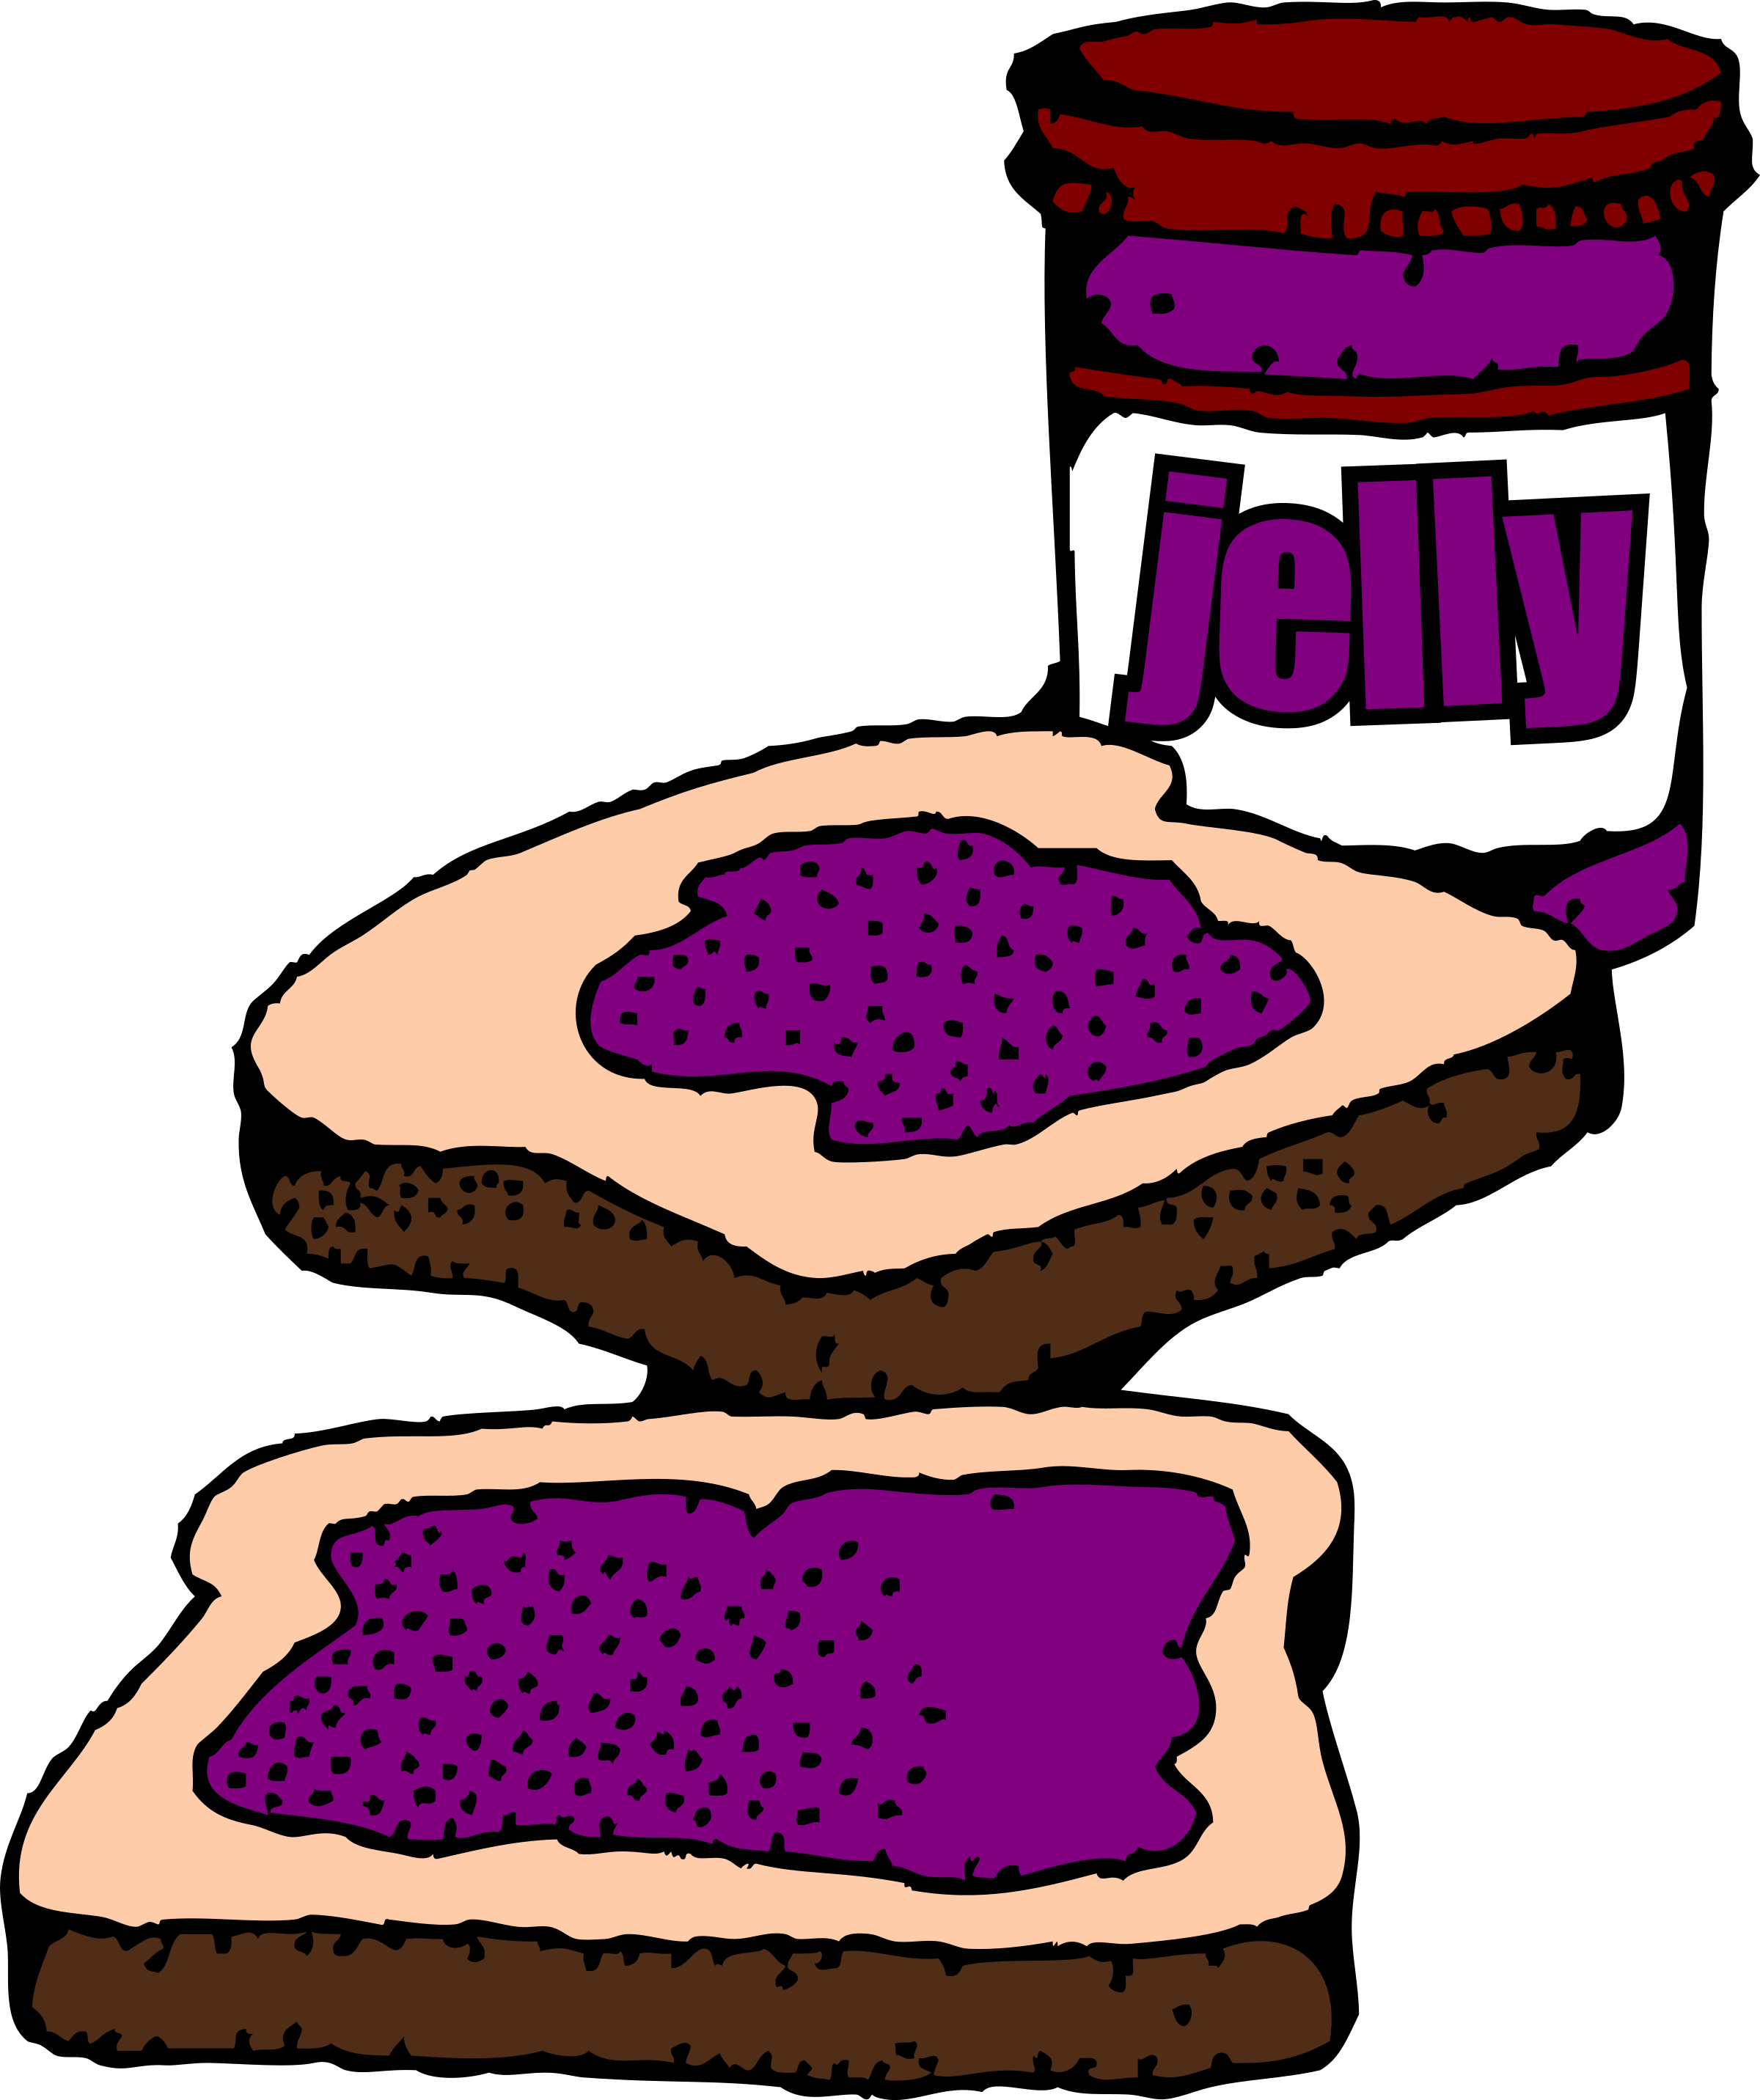 Peanut Butter and Jelly Jars. BIG IMAGE (PNG)